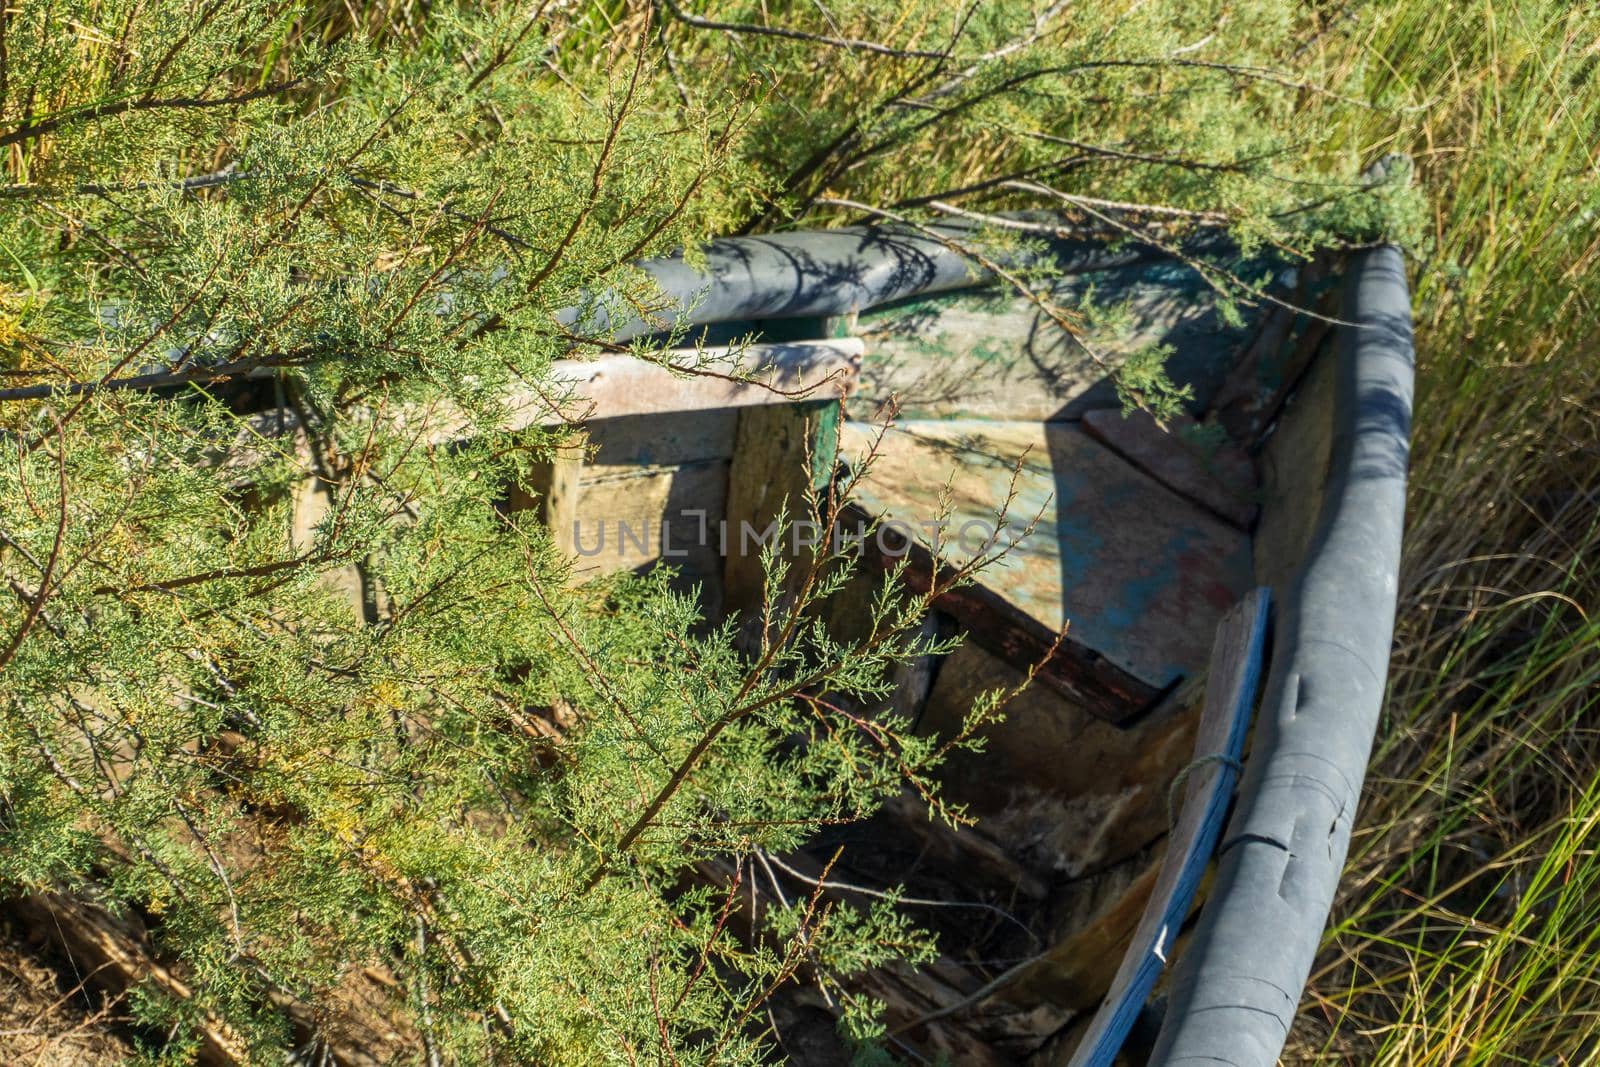 An old wooden boat abandoned in the thickets on the river bank close up